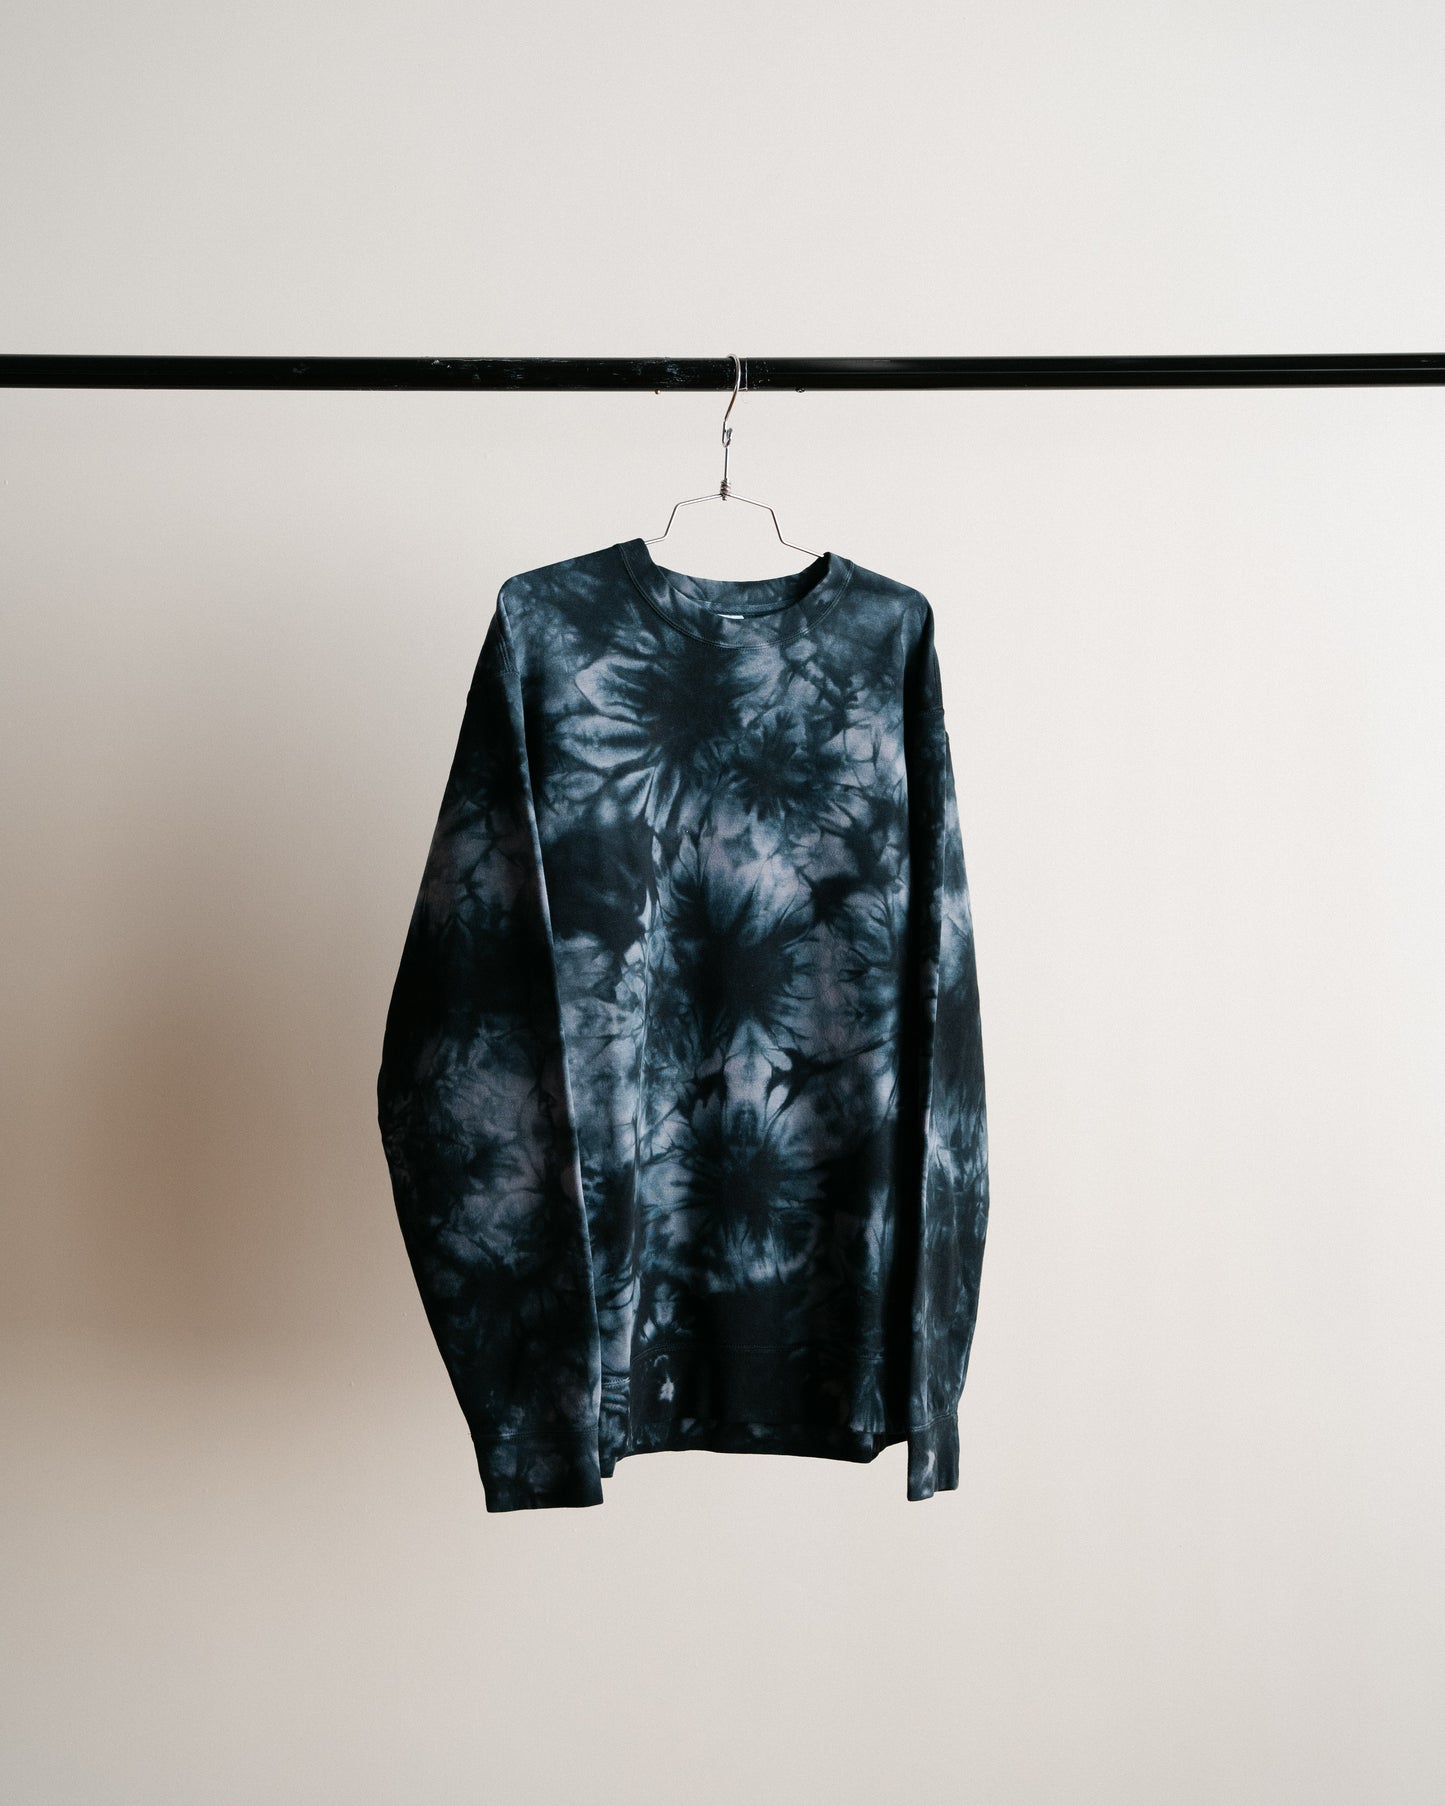 INDEPENDENT TRADING CO. - PRM3500 TIE-DYE